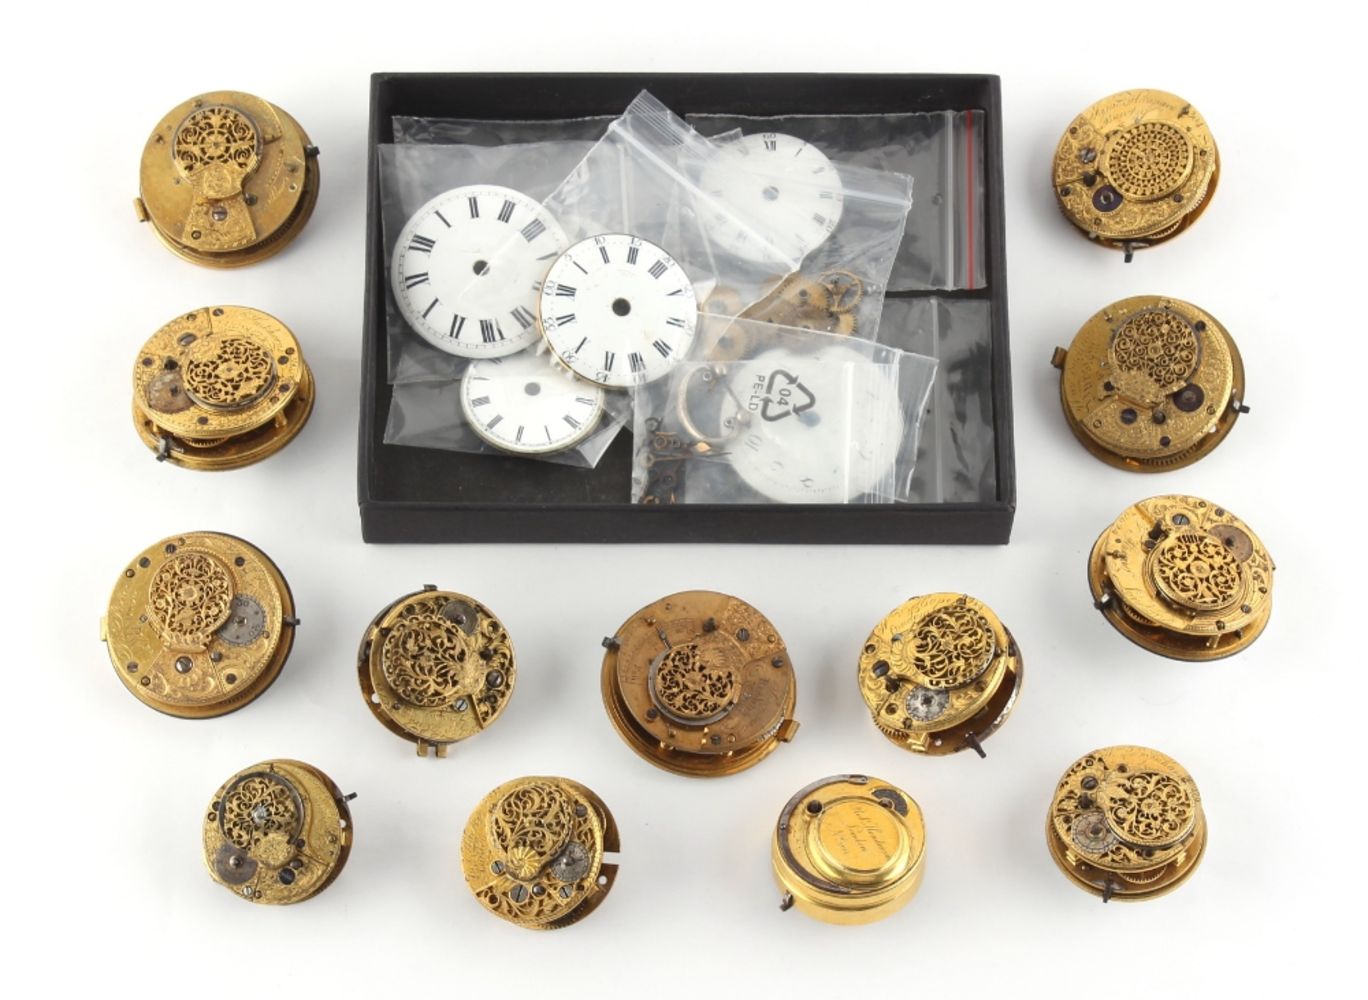 Watches & Jewellery; Coins & Silver; Toys & Dolls; and 20th Century Pictures & Decorative Arts